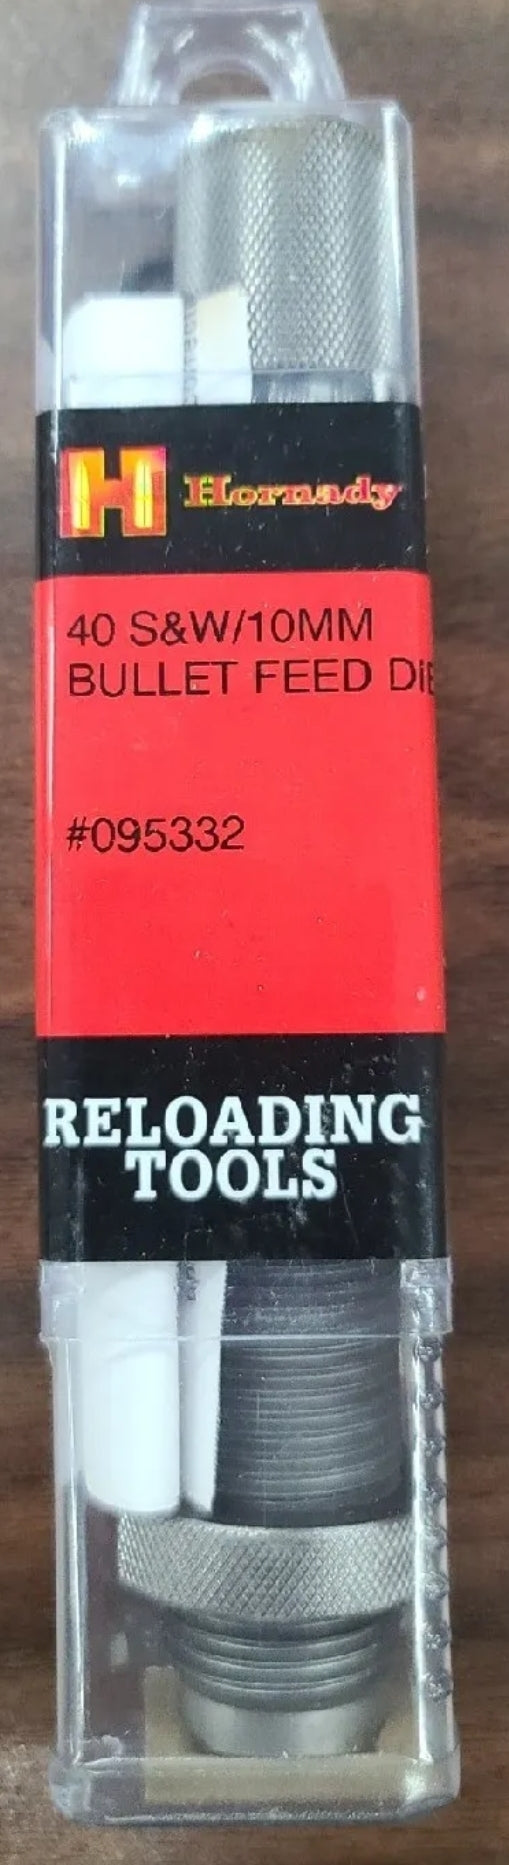 HORNADY BULLET FEED DIE 40 S&W 10mm AUTO 095332 RELOADING TOOL